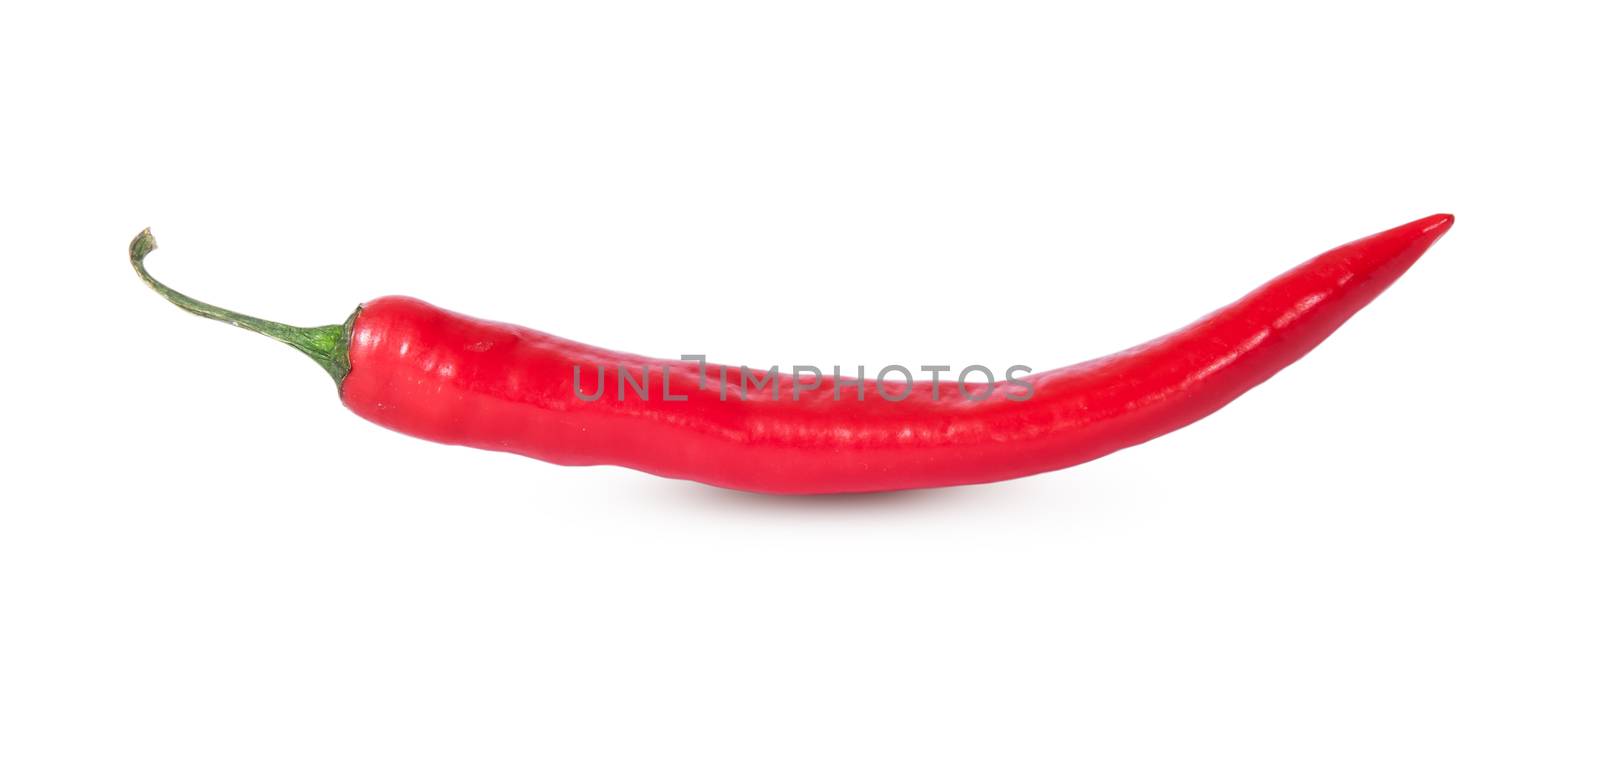 Ripe juicy red hot chili peppers isolated on white background